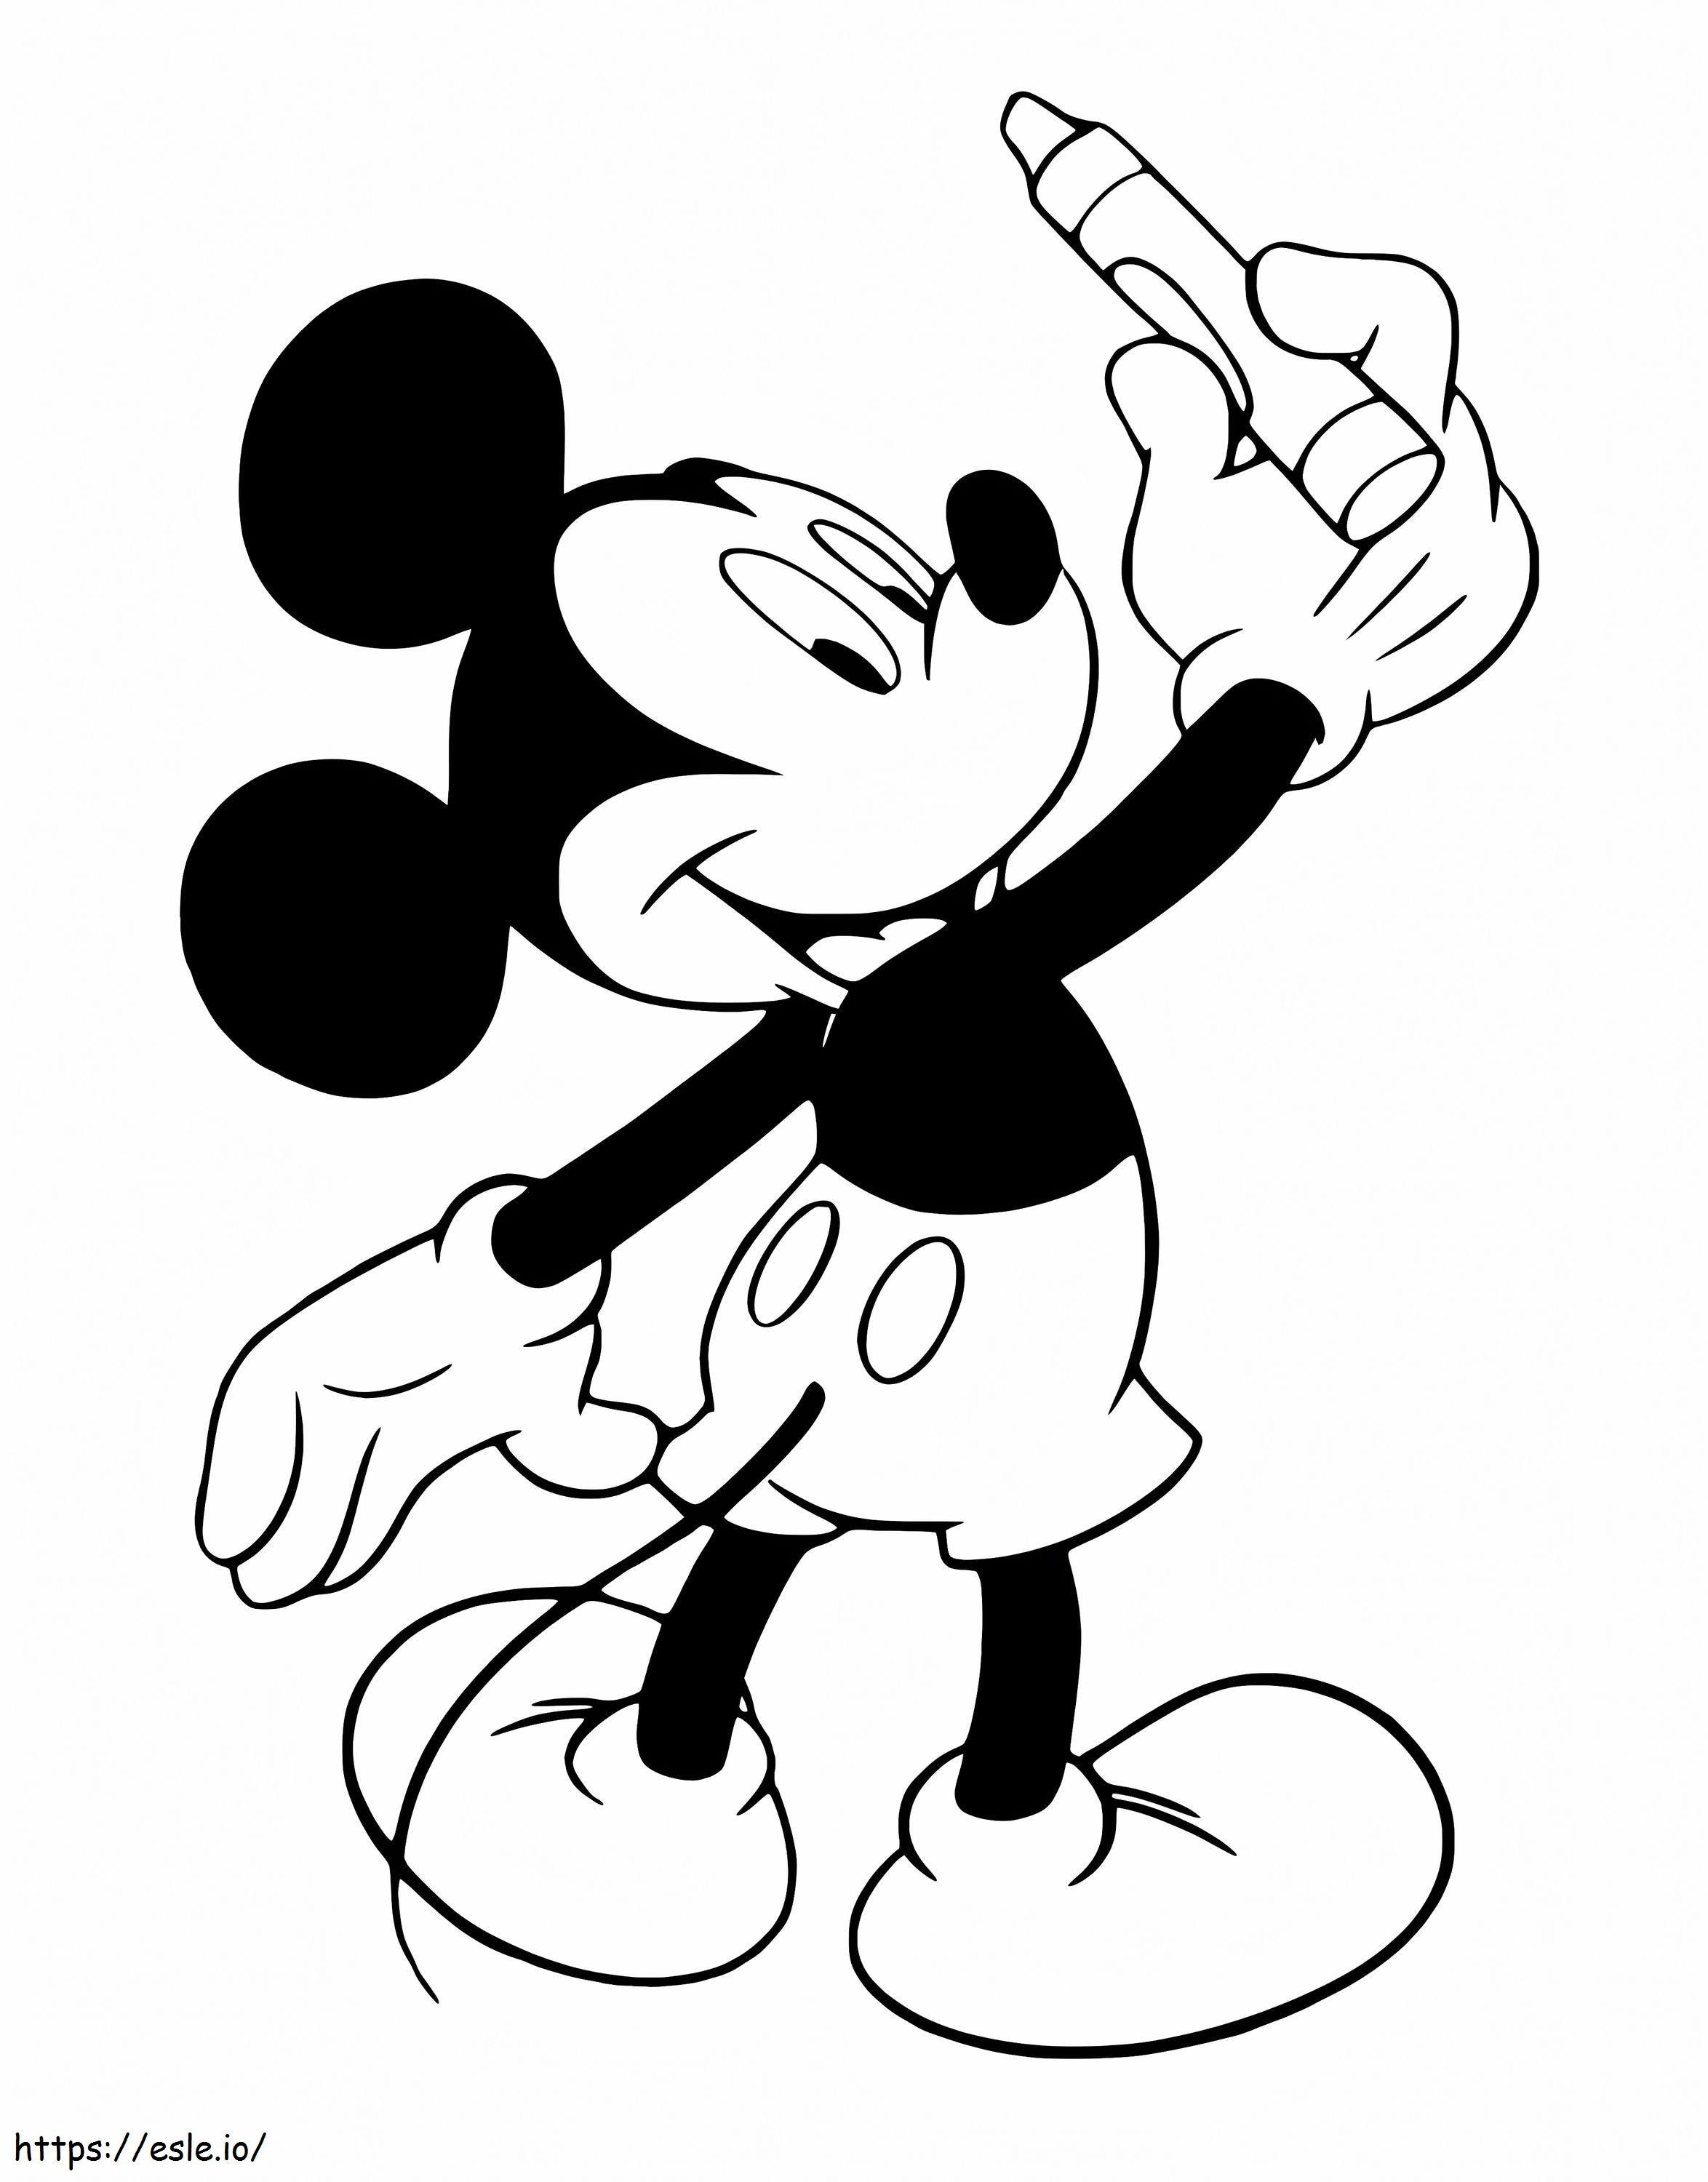 Mickey Mouse Holding Crayons coloring page